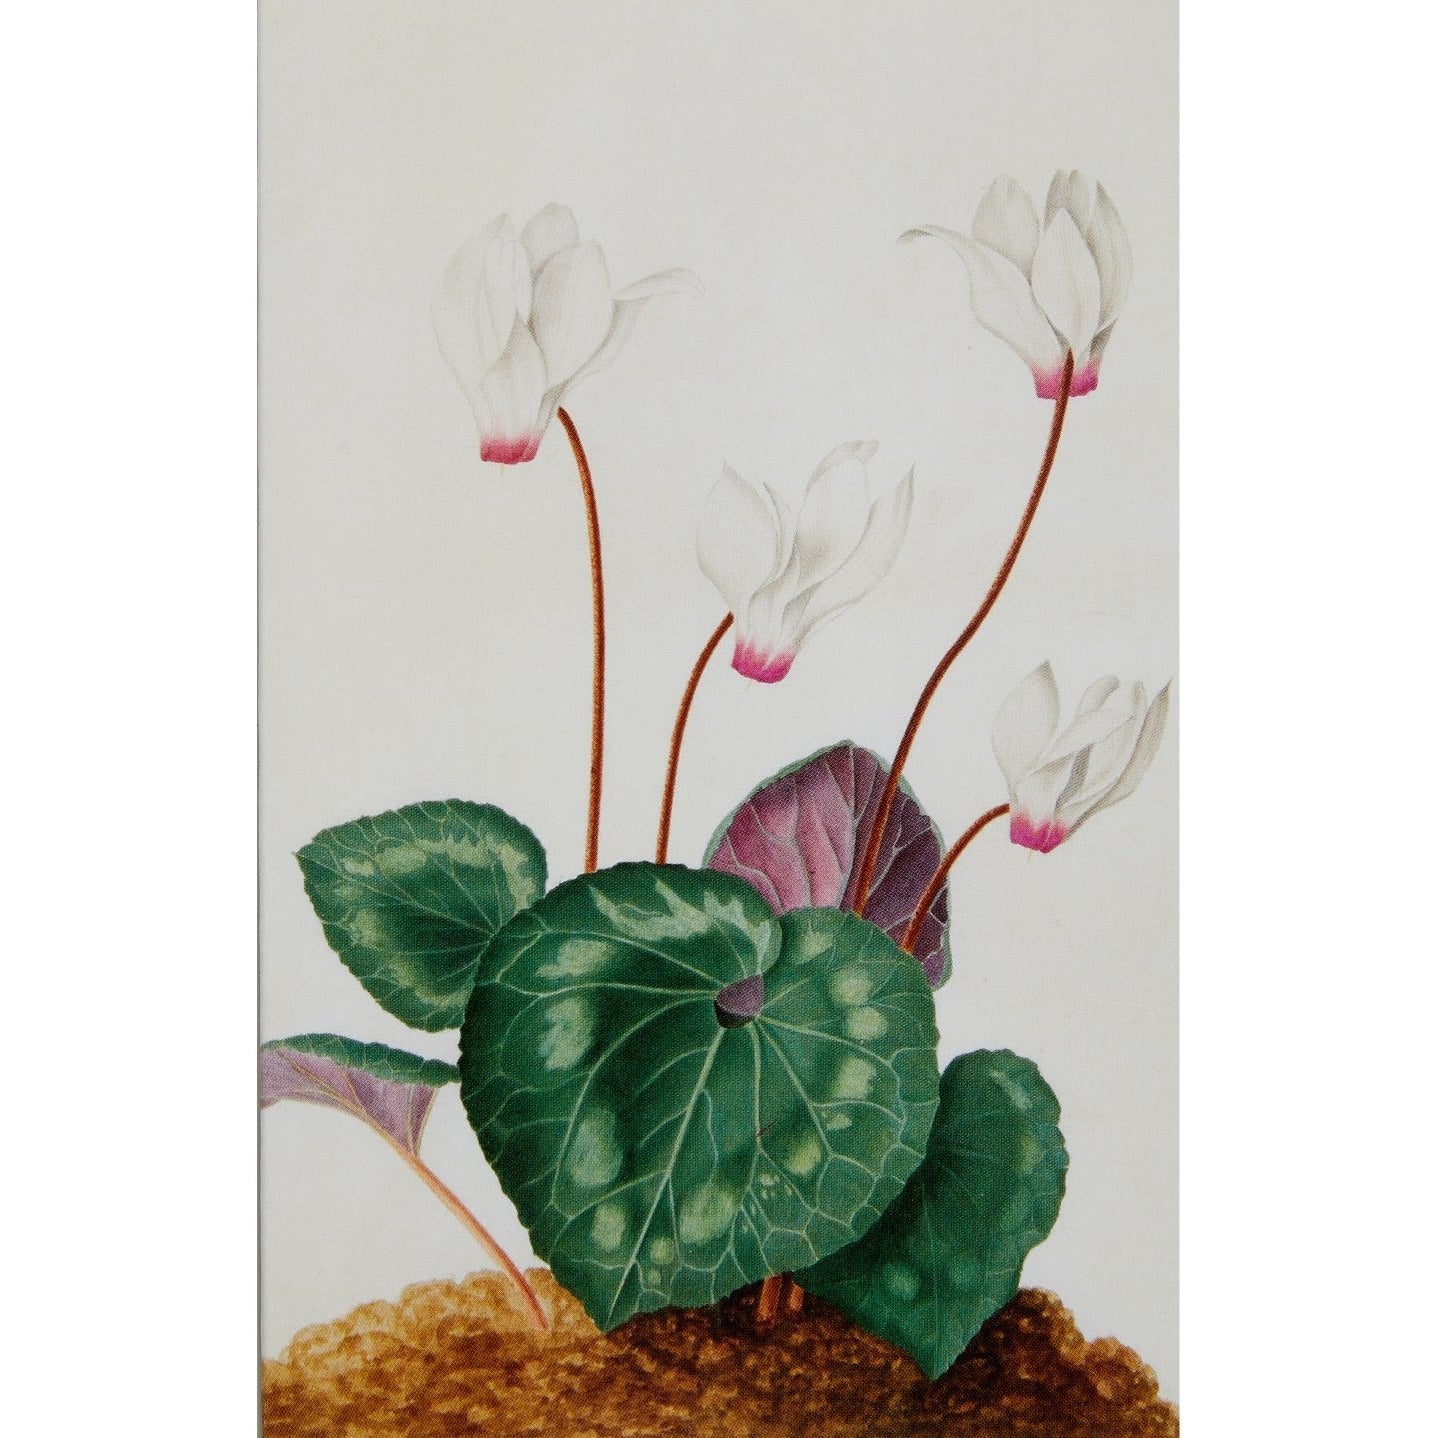 Notecard image - Cyclamen persicum by Elizabeth Burgoyne. From the Broughton collection of the Fitzwilliam Museum, brought to you by CuratingCambridge.co.uk